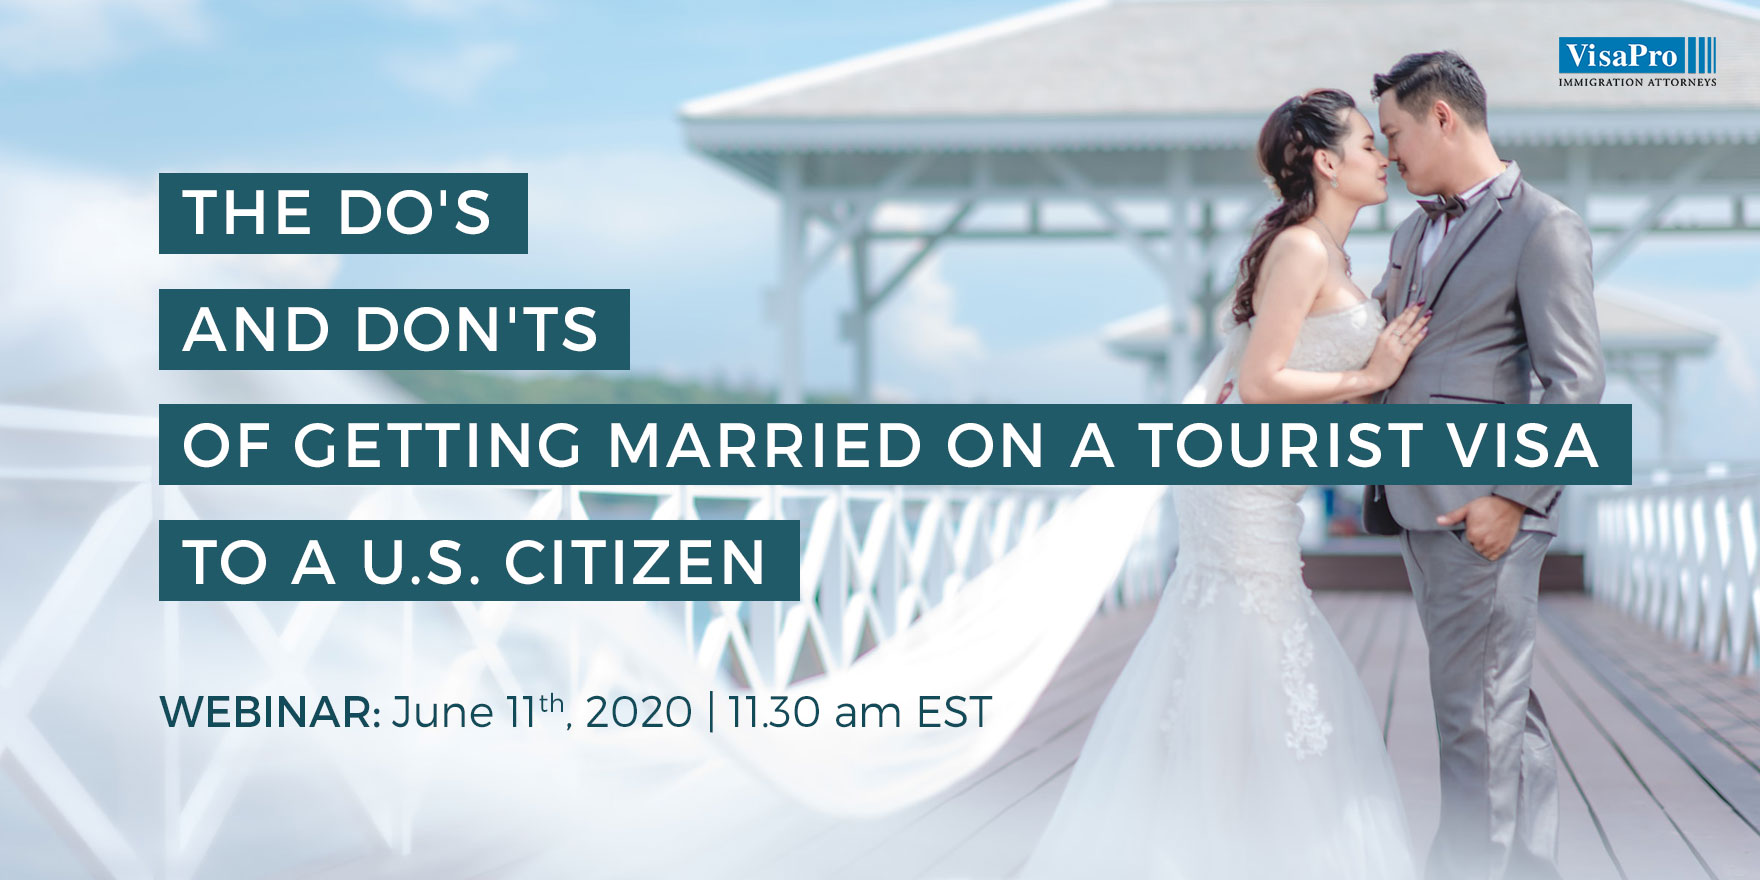 The Do's And Don'ts of Getting Married on A Tourist Visa To A U.S. Citizen, Kingston, Jamaica